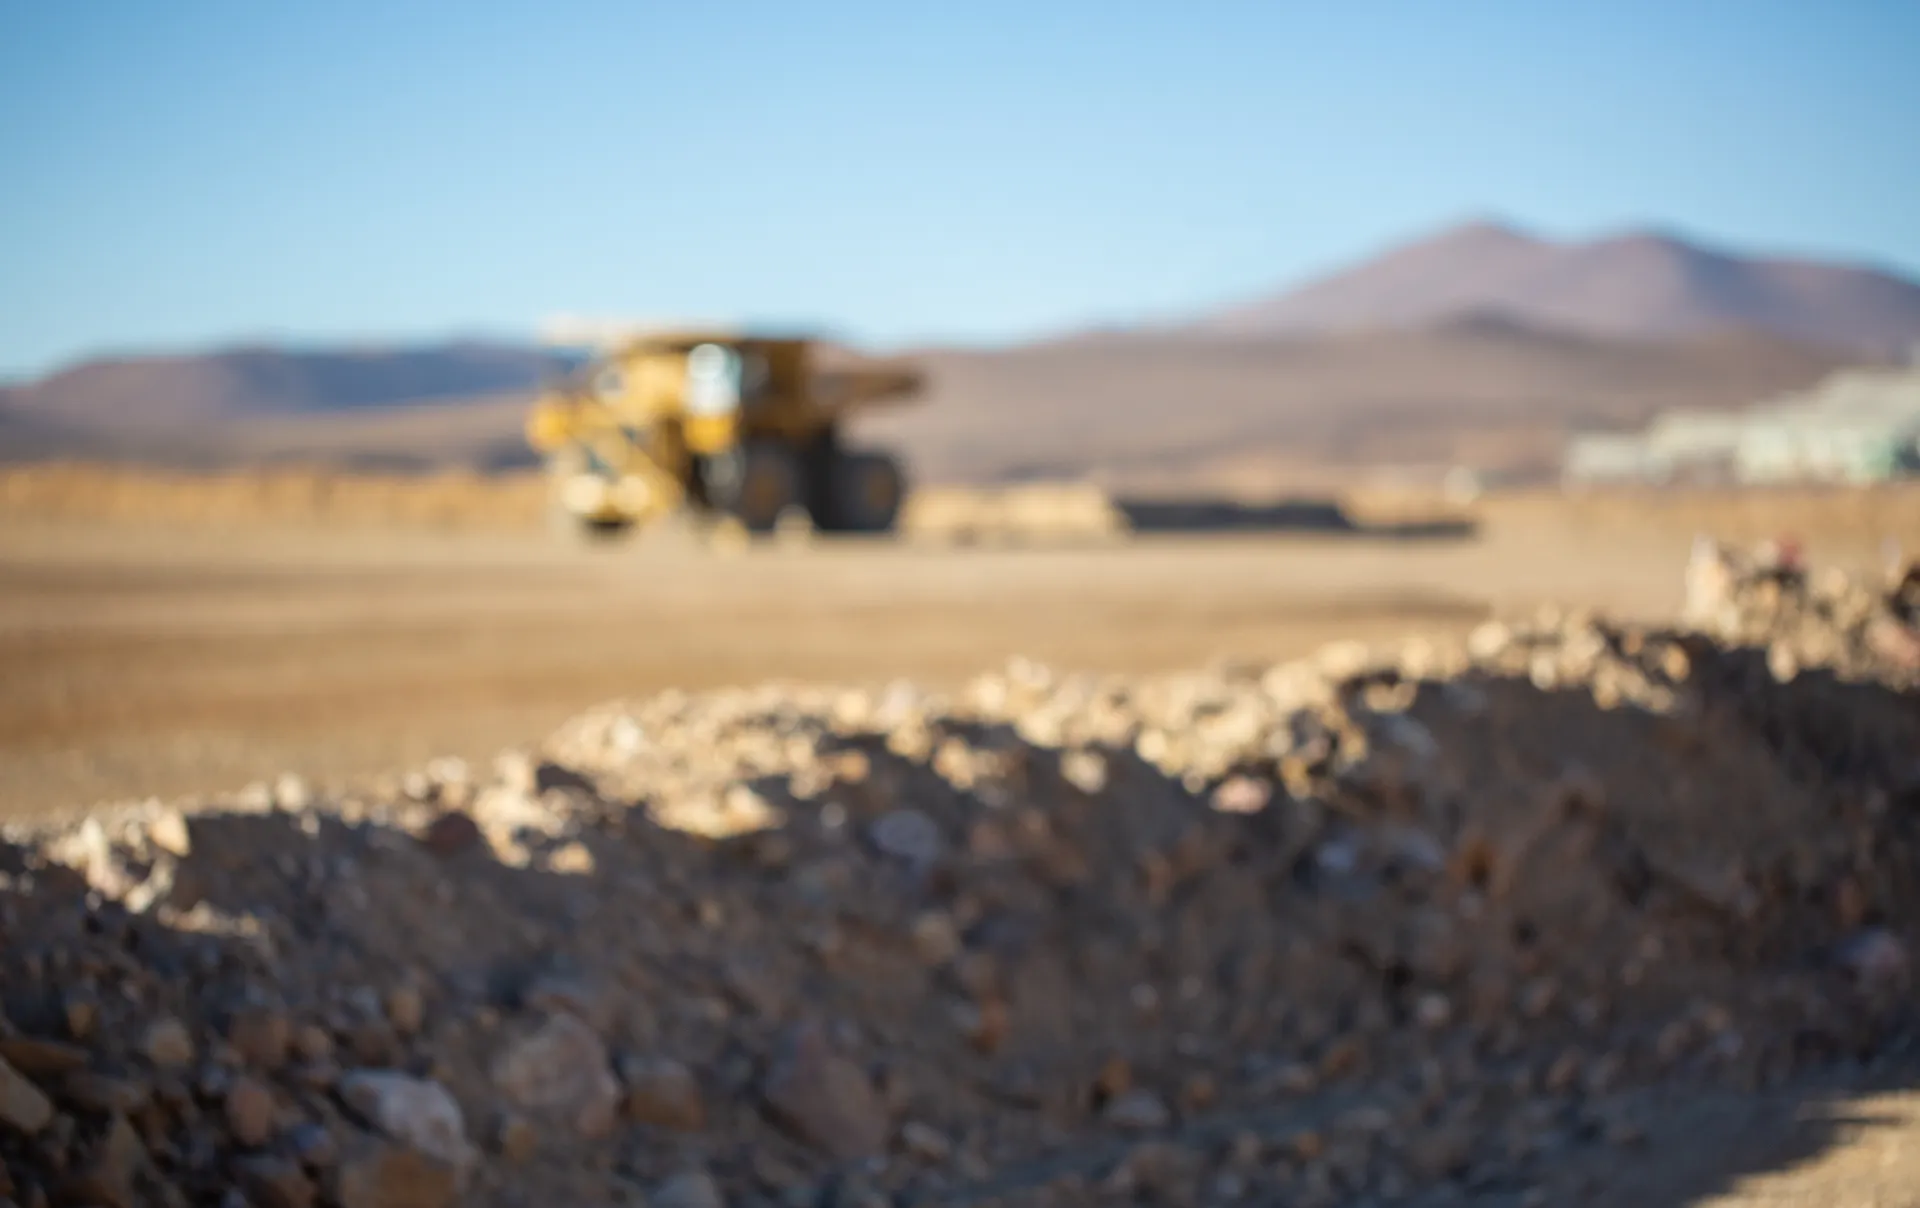 Blurred image of a construction vehicle on a rocky terrain in a desert landscape under a blue sky.